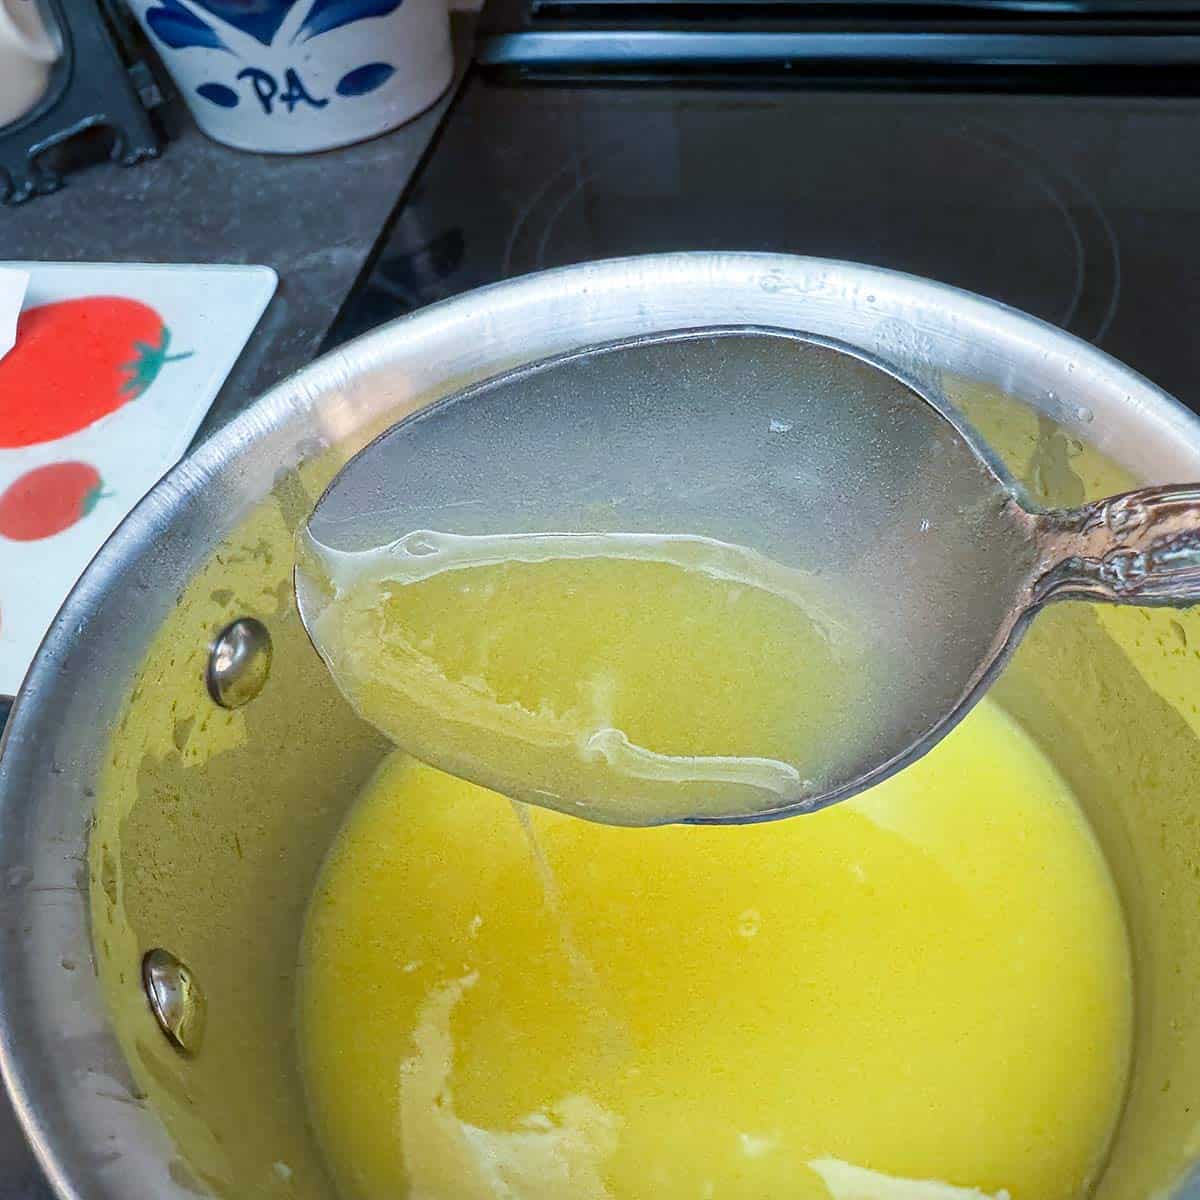 A few pieces of egg are in the curd, so straining them will be the way to go.